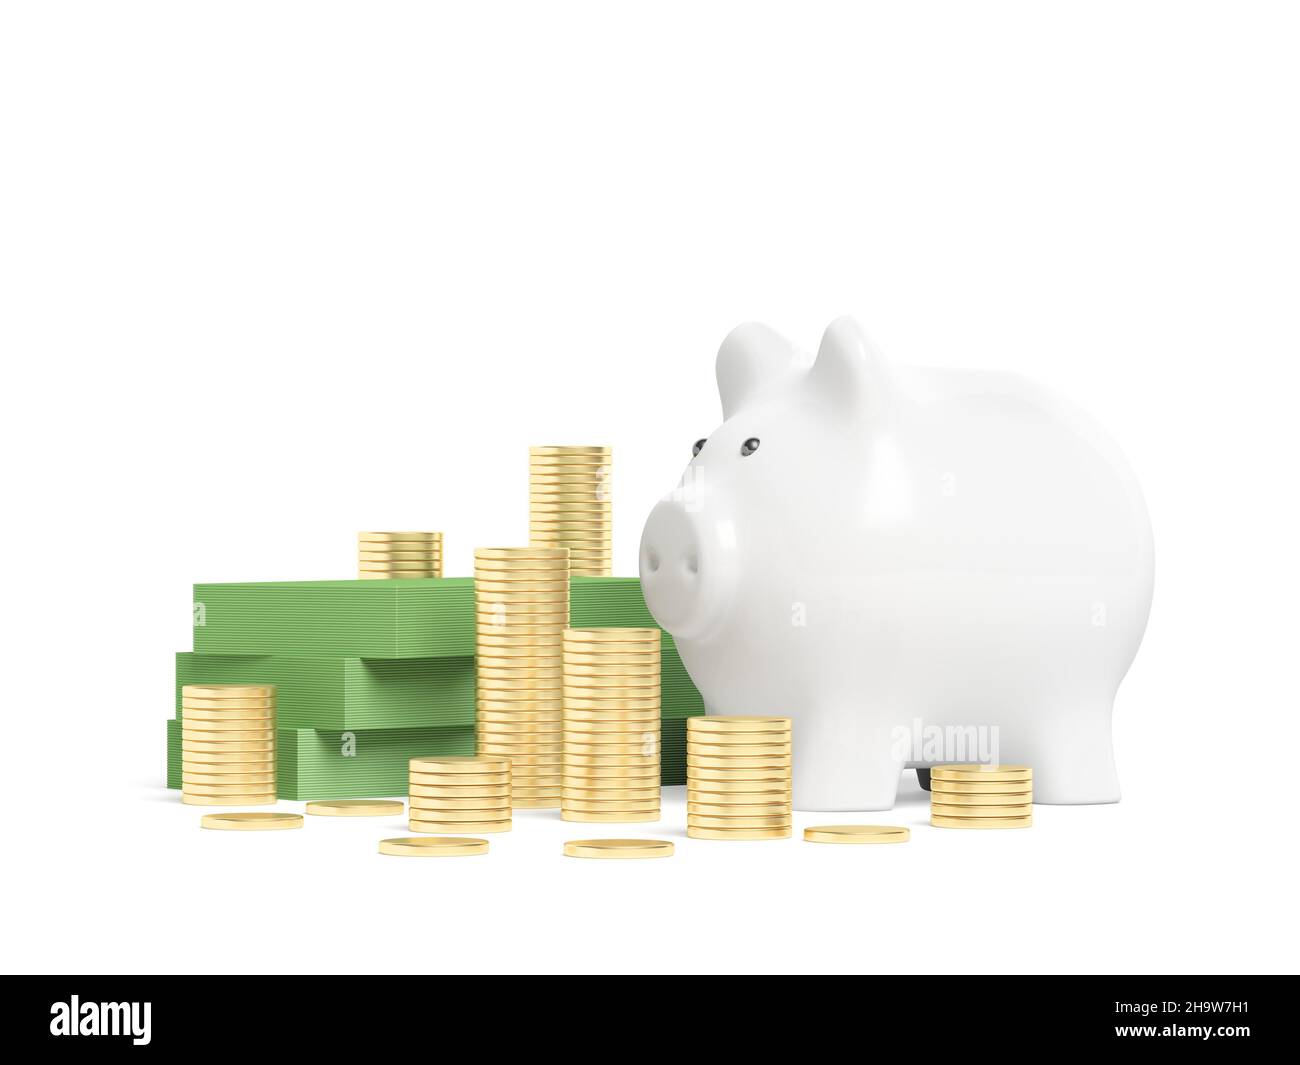 Money and piggy bank isolated on white background. 3d illustration. Stock Photo